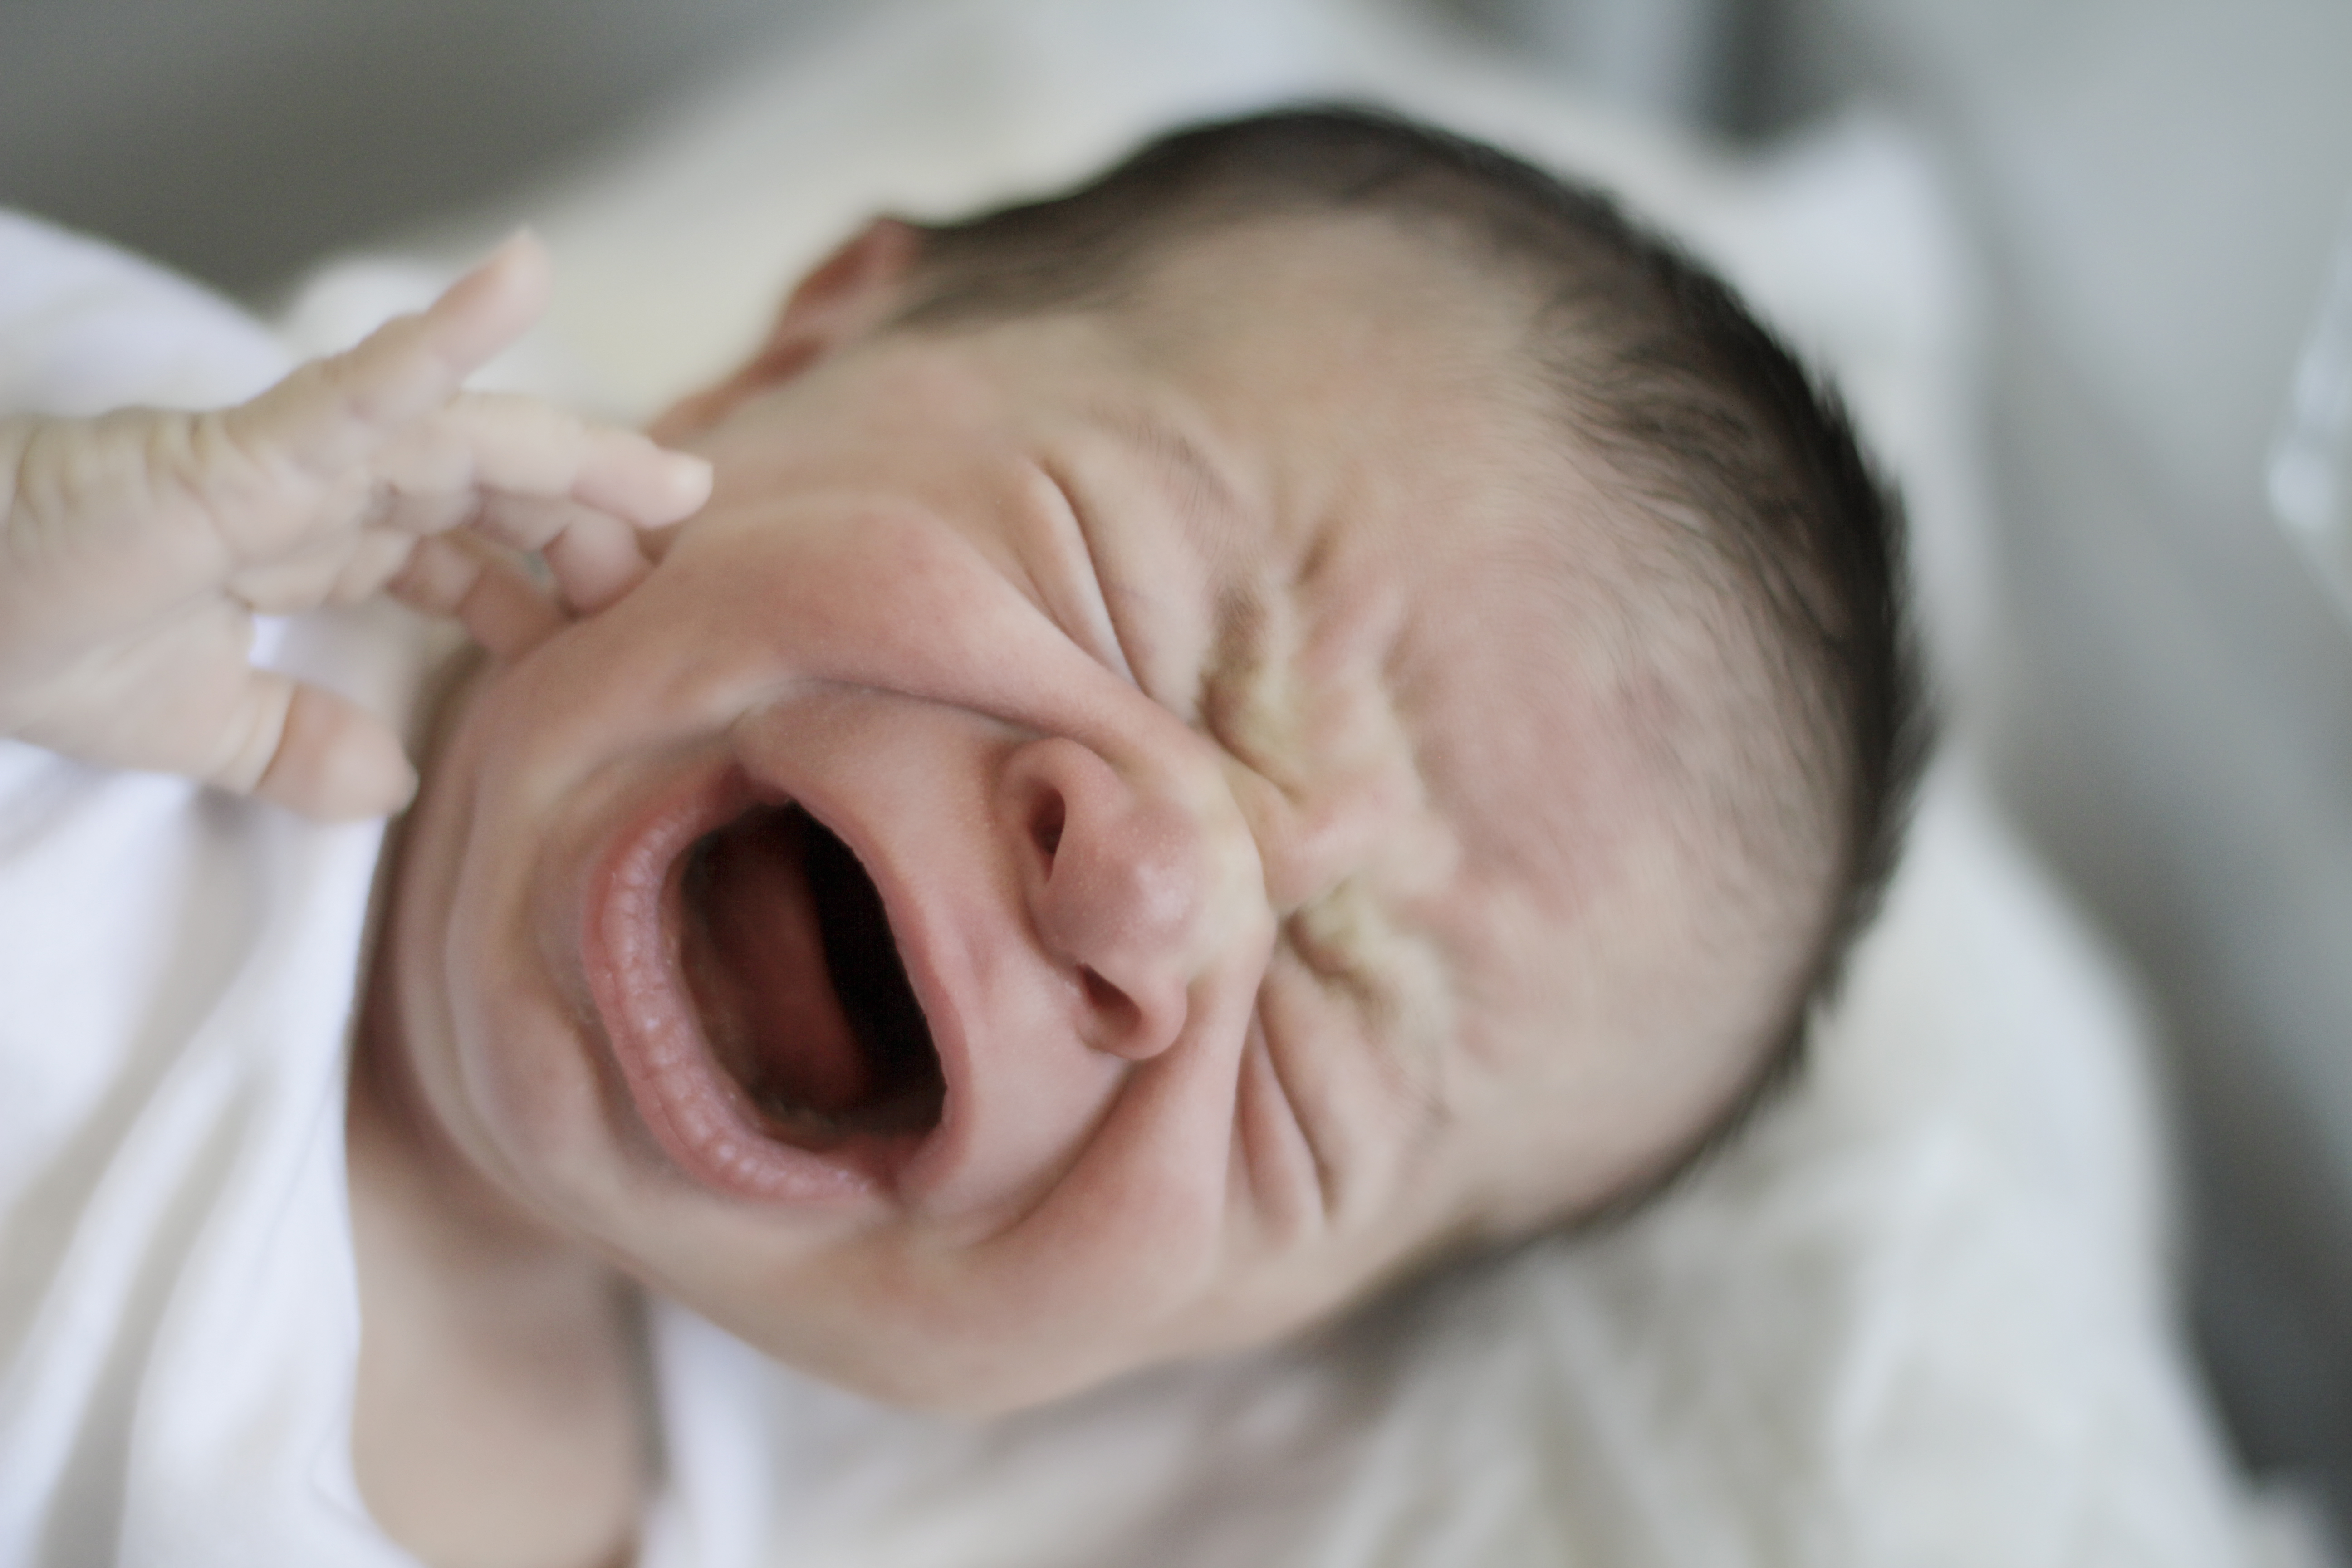 Baby crying | Source: Getty Images